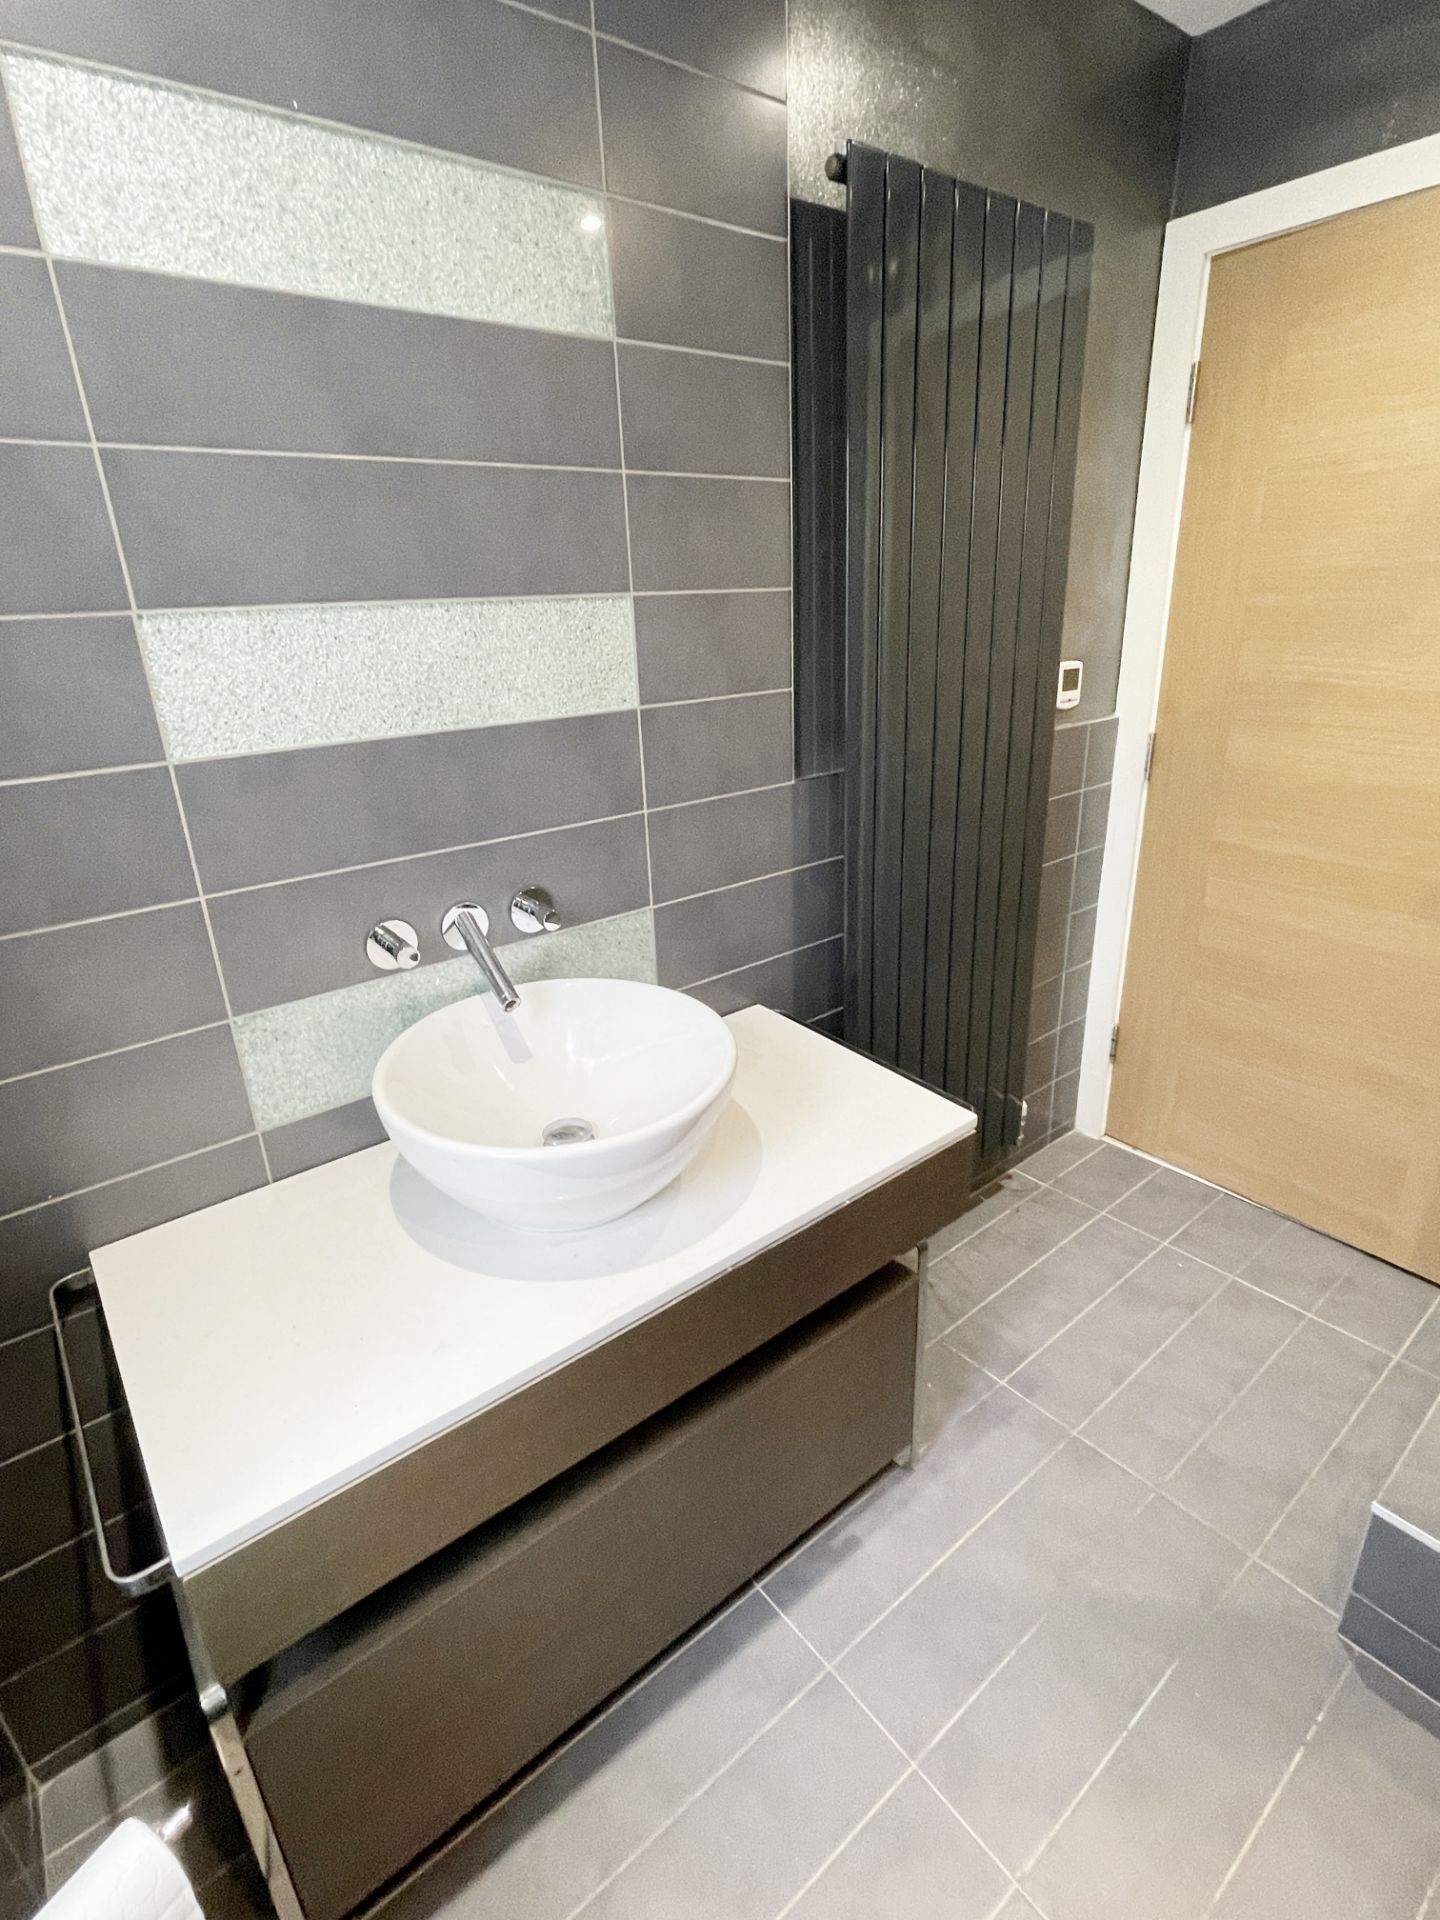 1 x Luxury Downstairs Bathroom Suite Featuring Villeroy+Boch Sink & WC Shower - Ref: D'STRS/BR - - Image 29 of 29